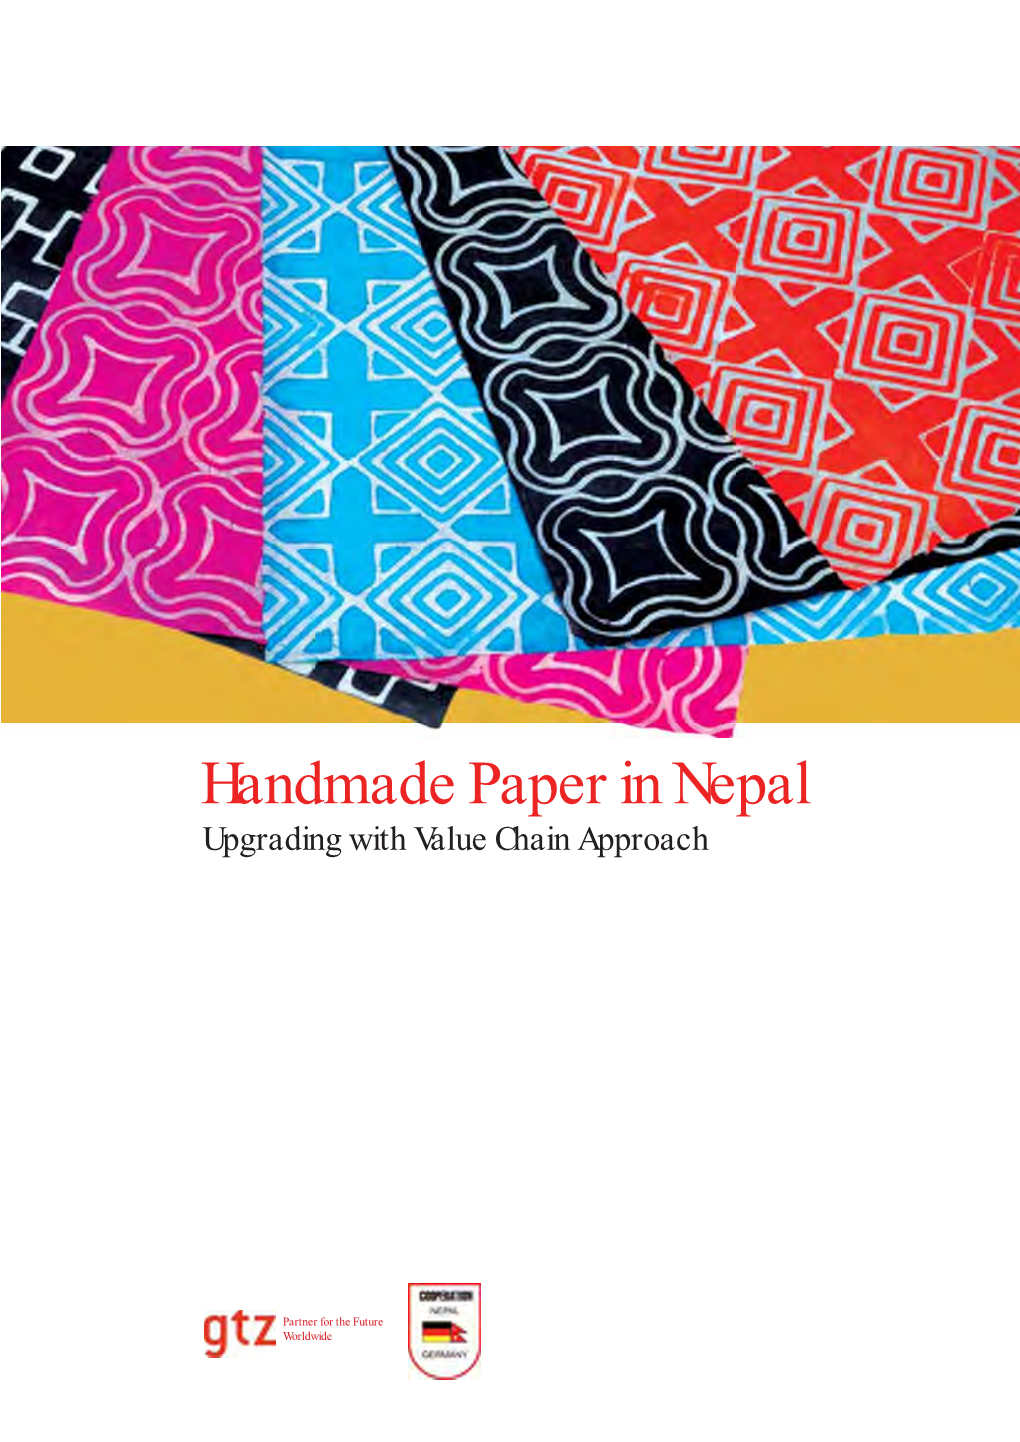 Handmade Paper in Nepal Upgrading with Value Chain Approach